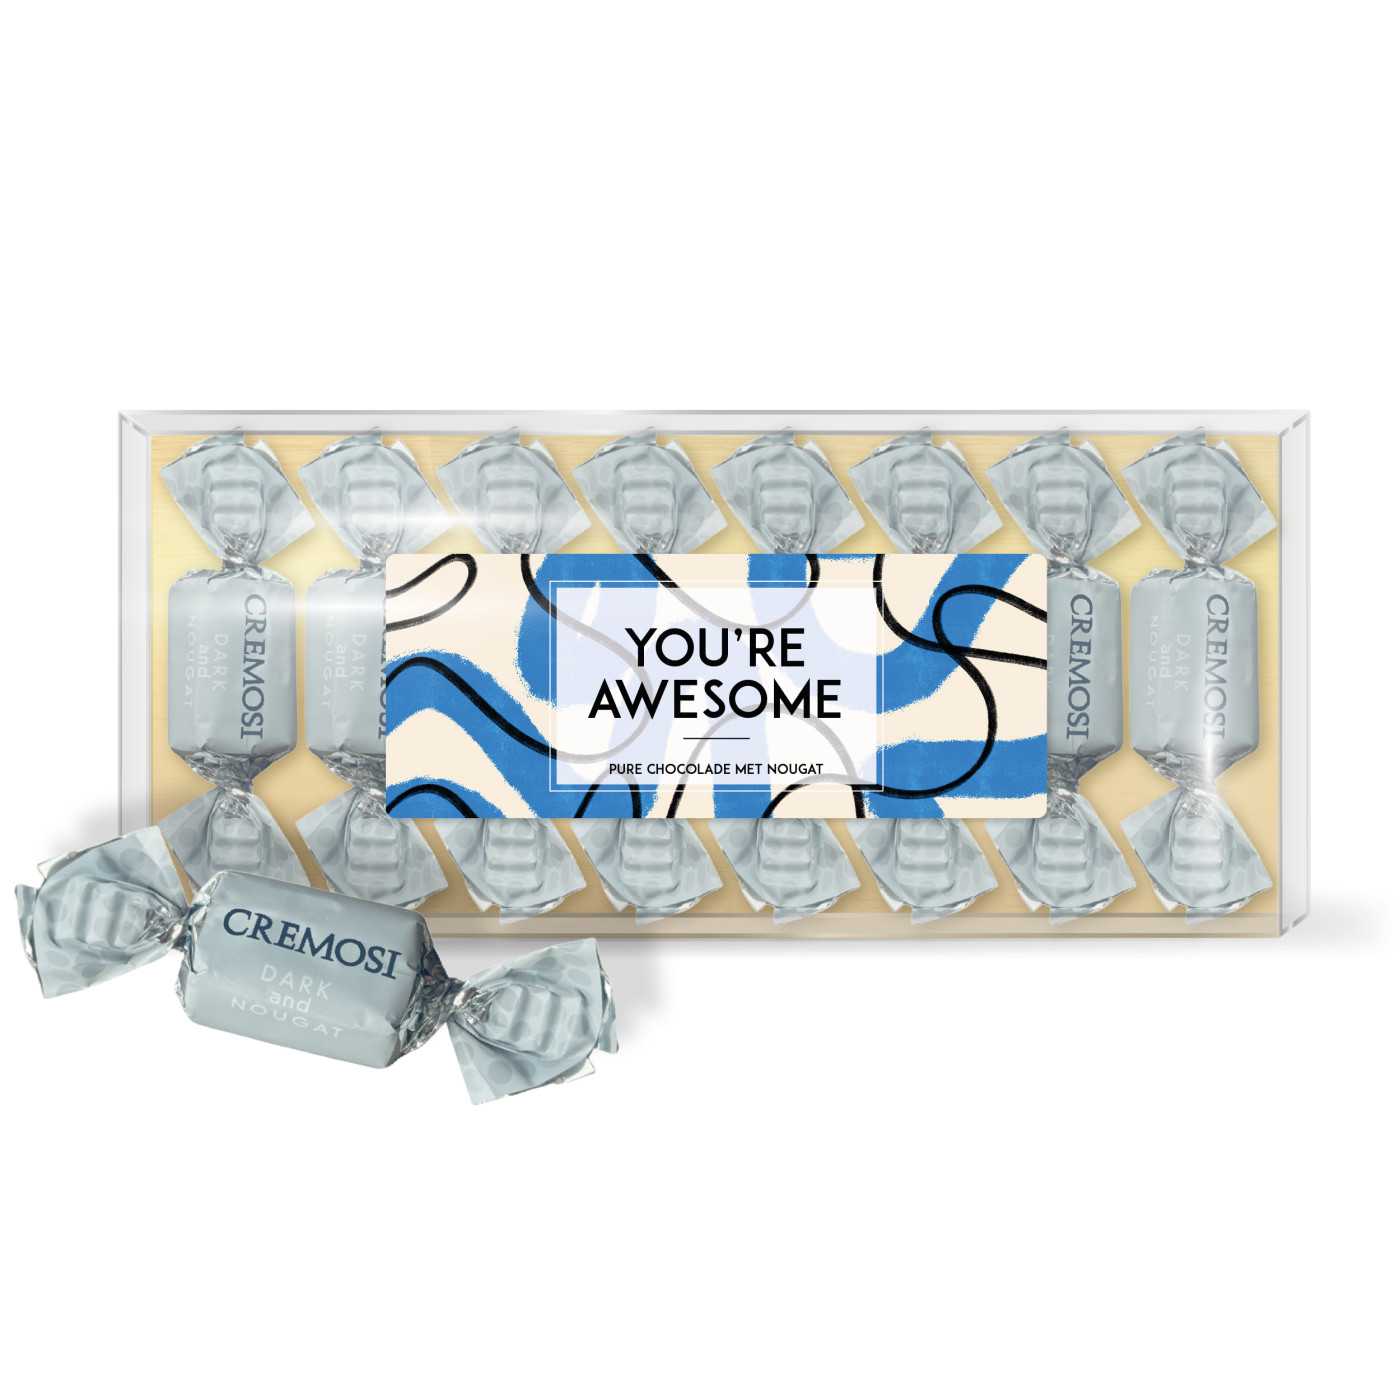 "You're Awesome" Pure chocolade nougat blister (zilver) 10st